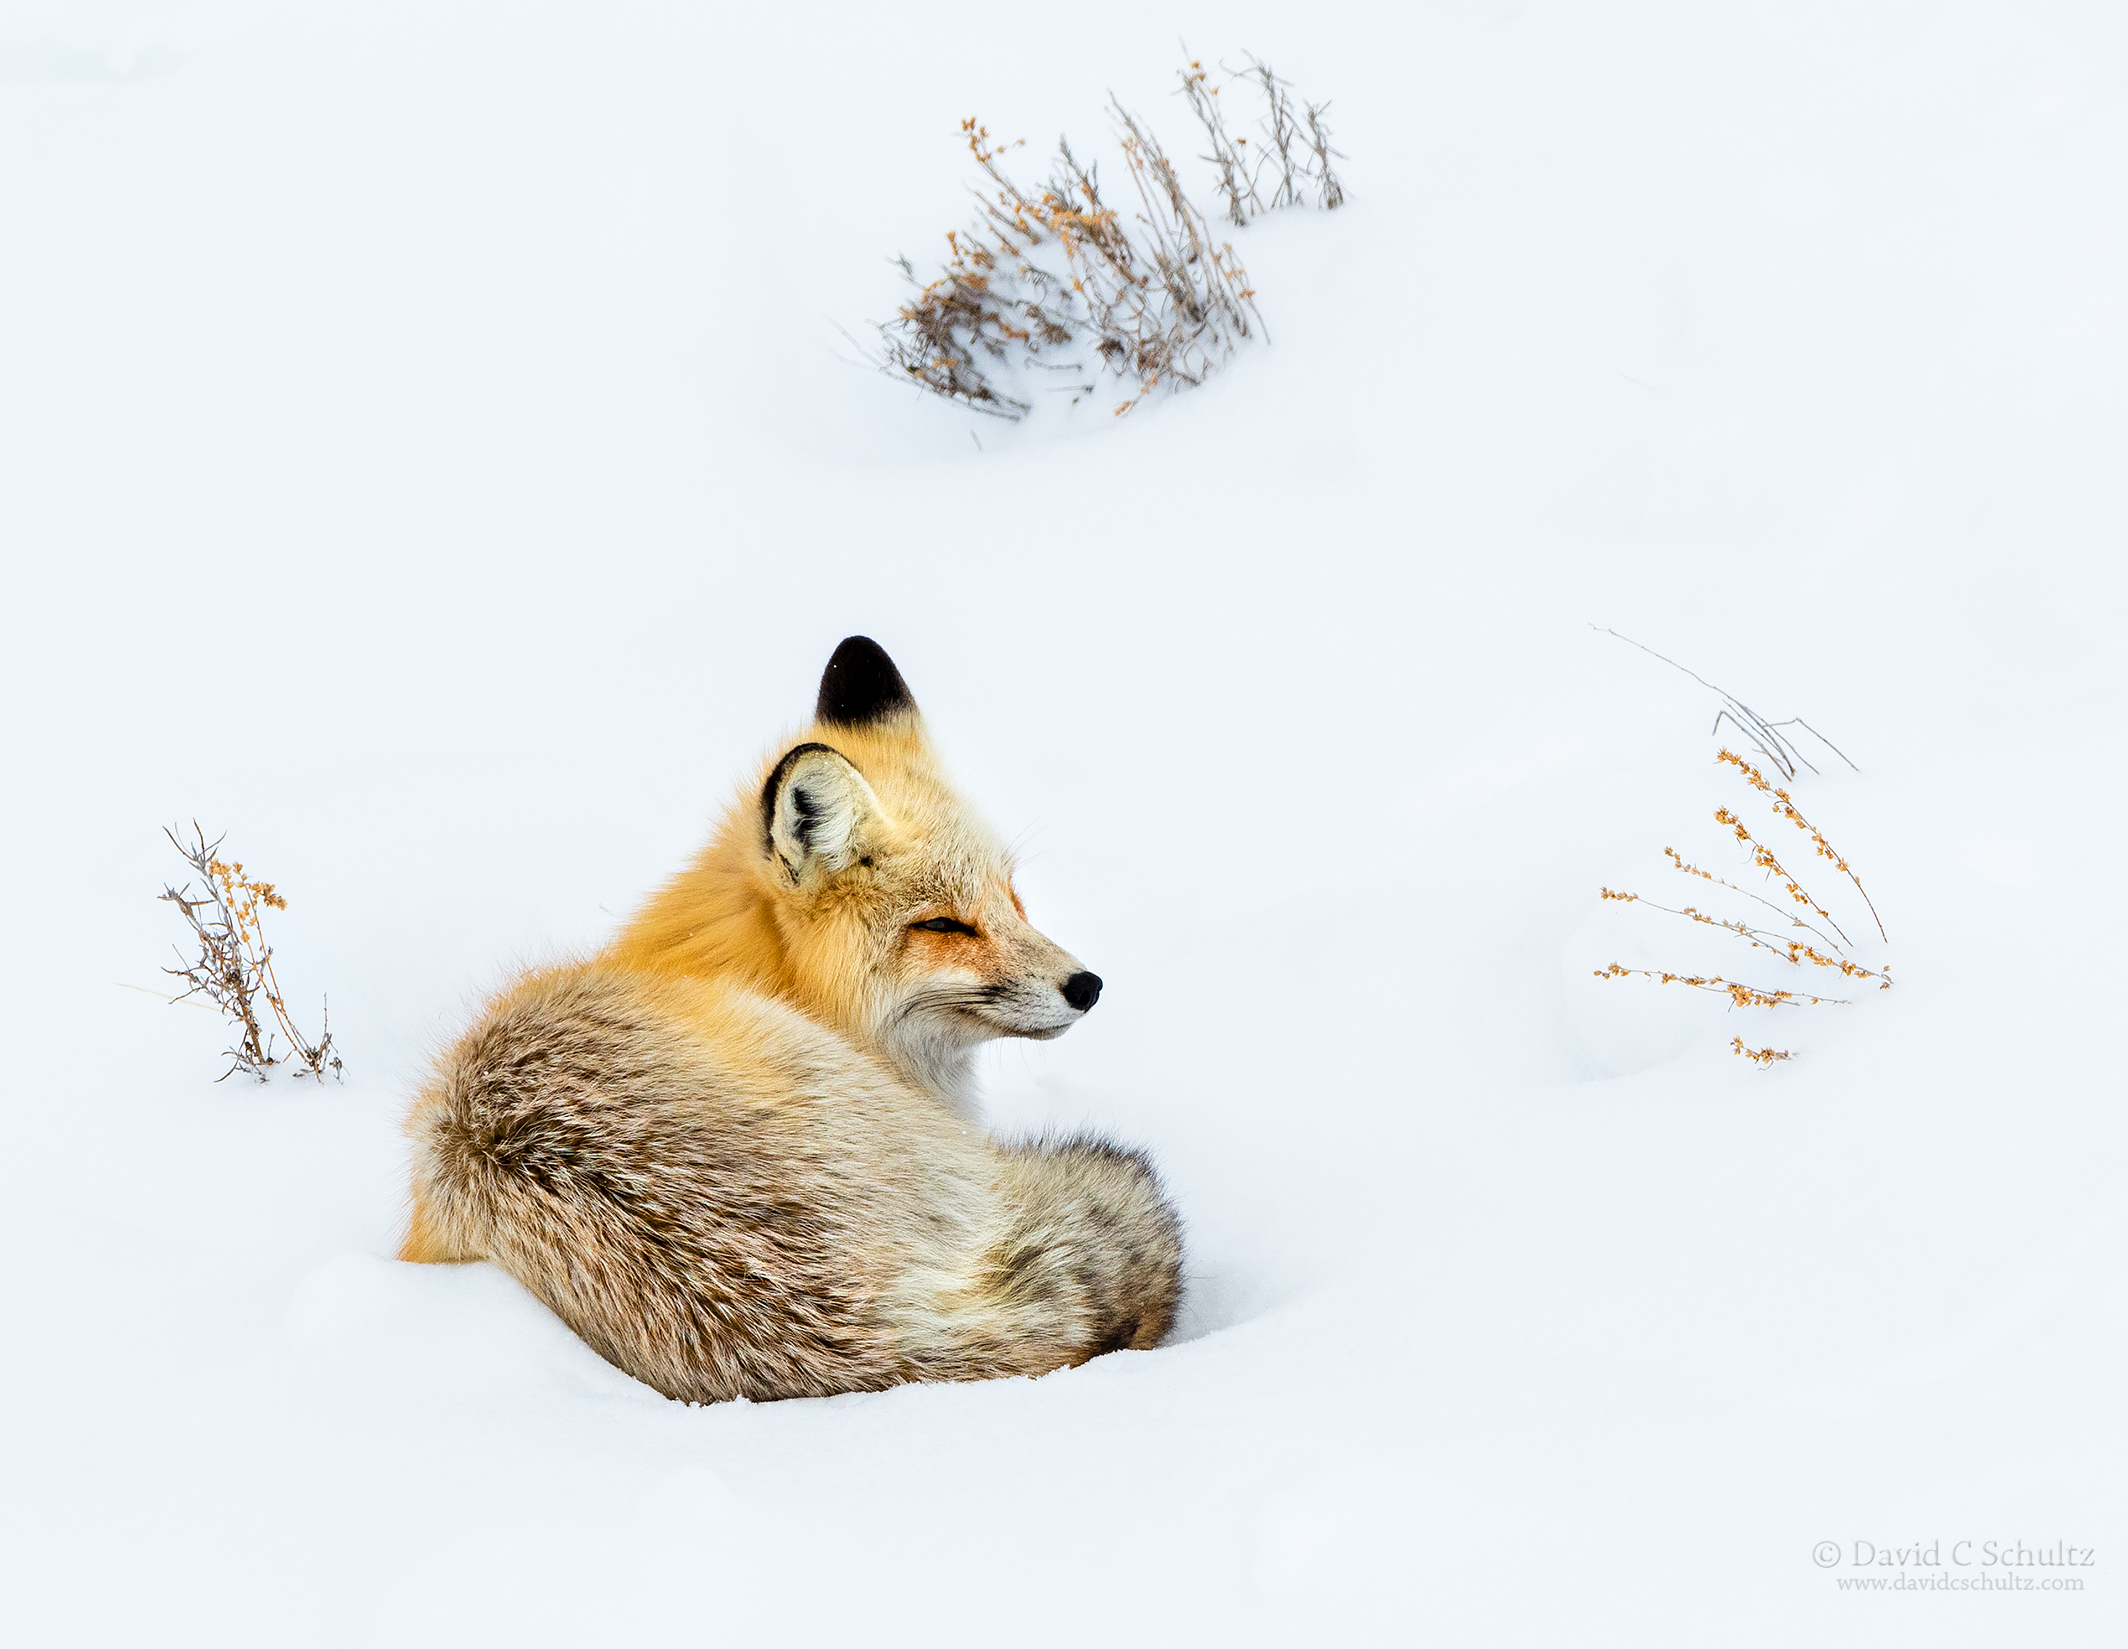 Red fox in Yellowstone National Park - Image #161-9006